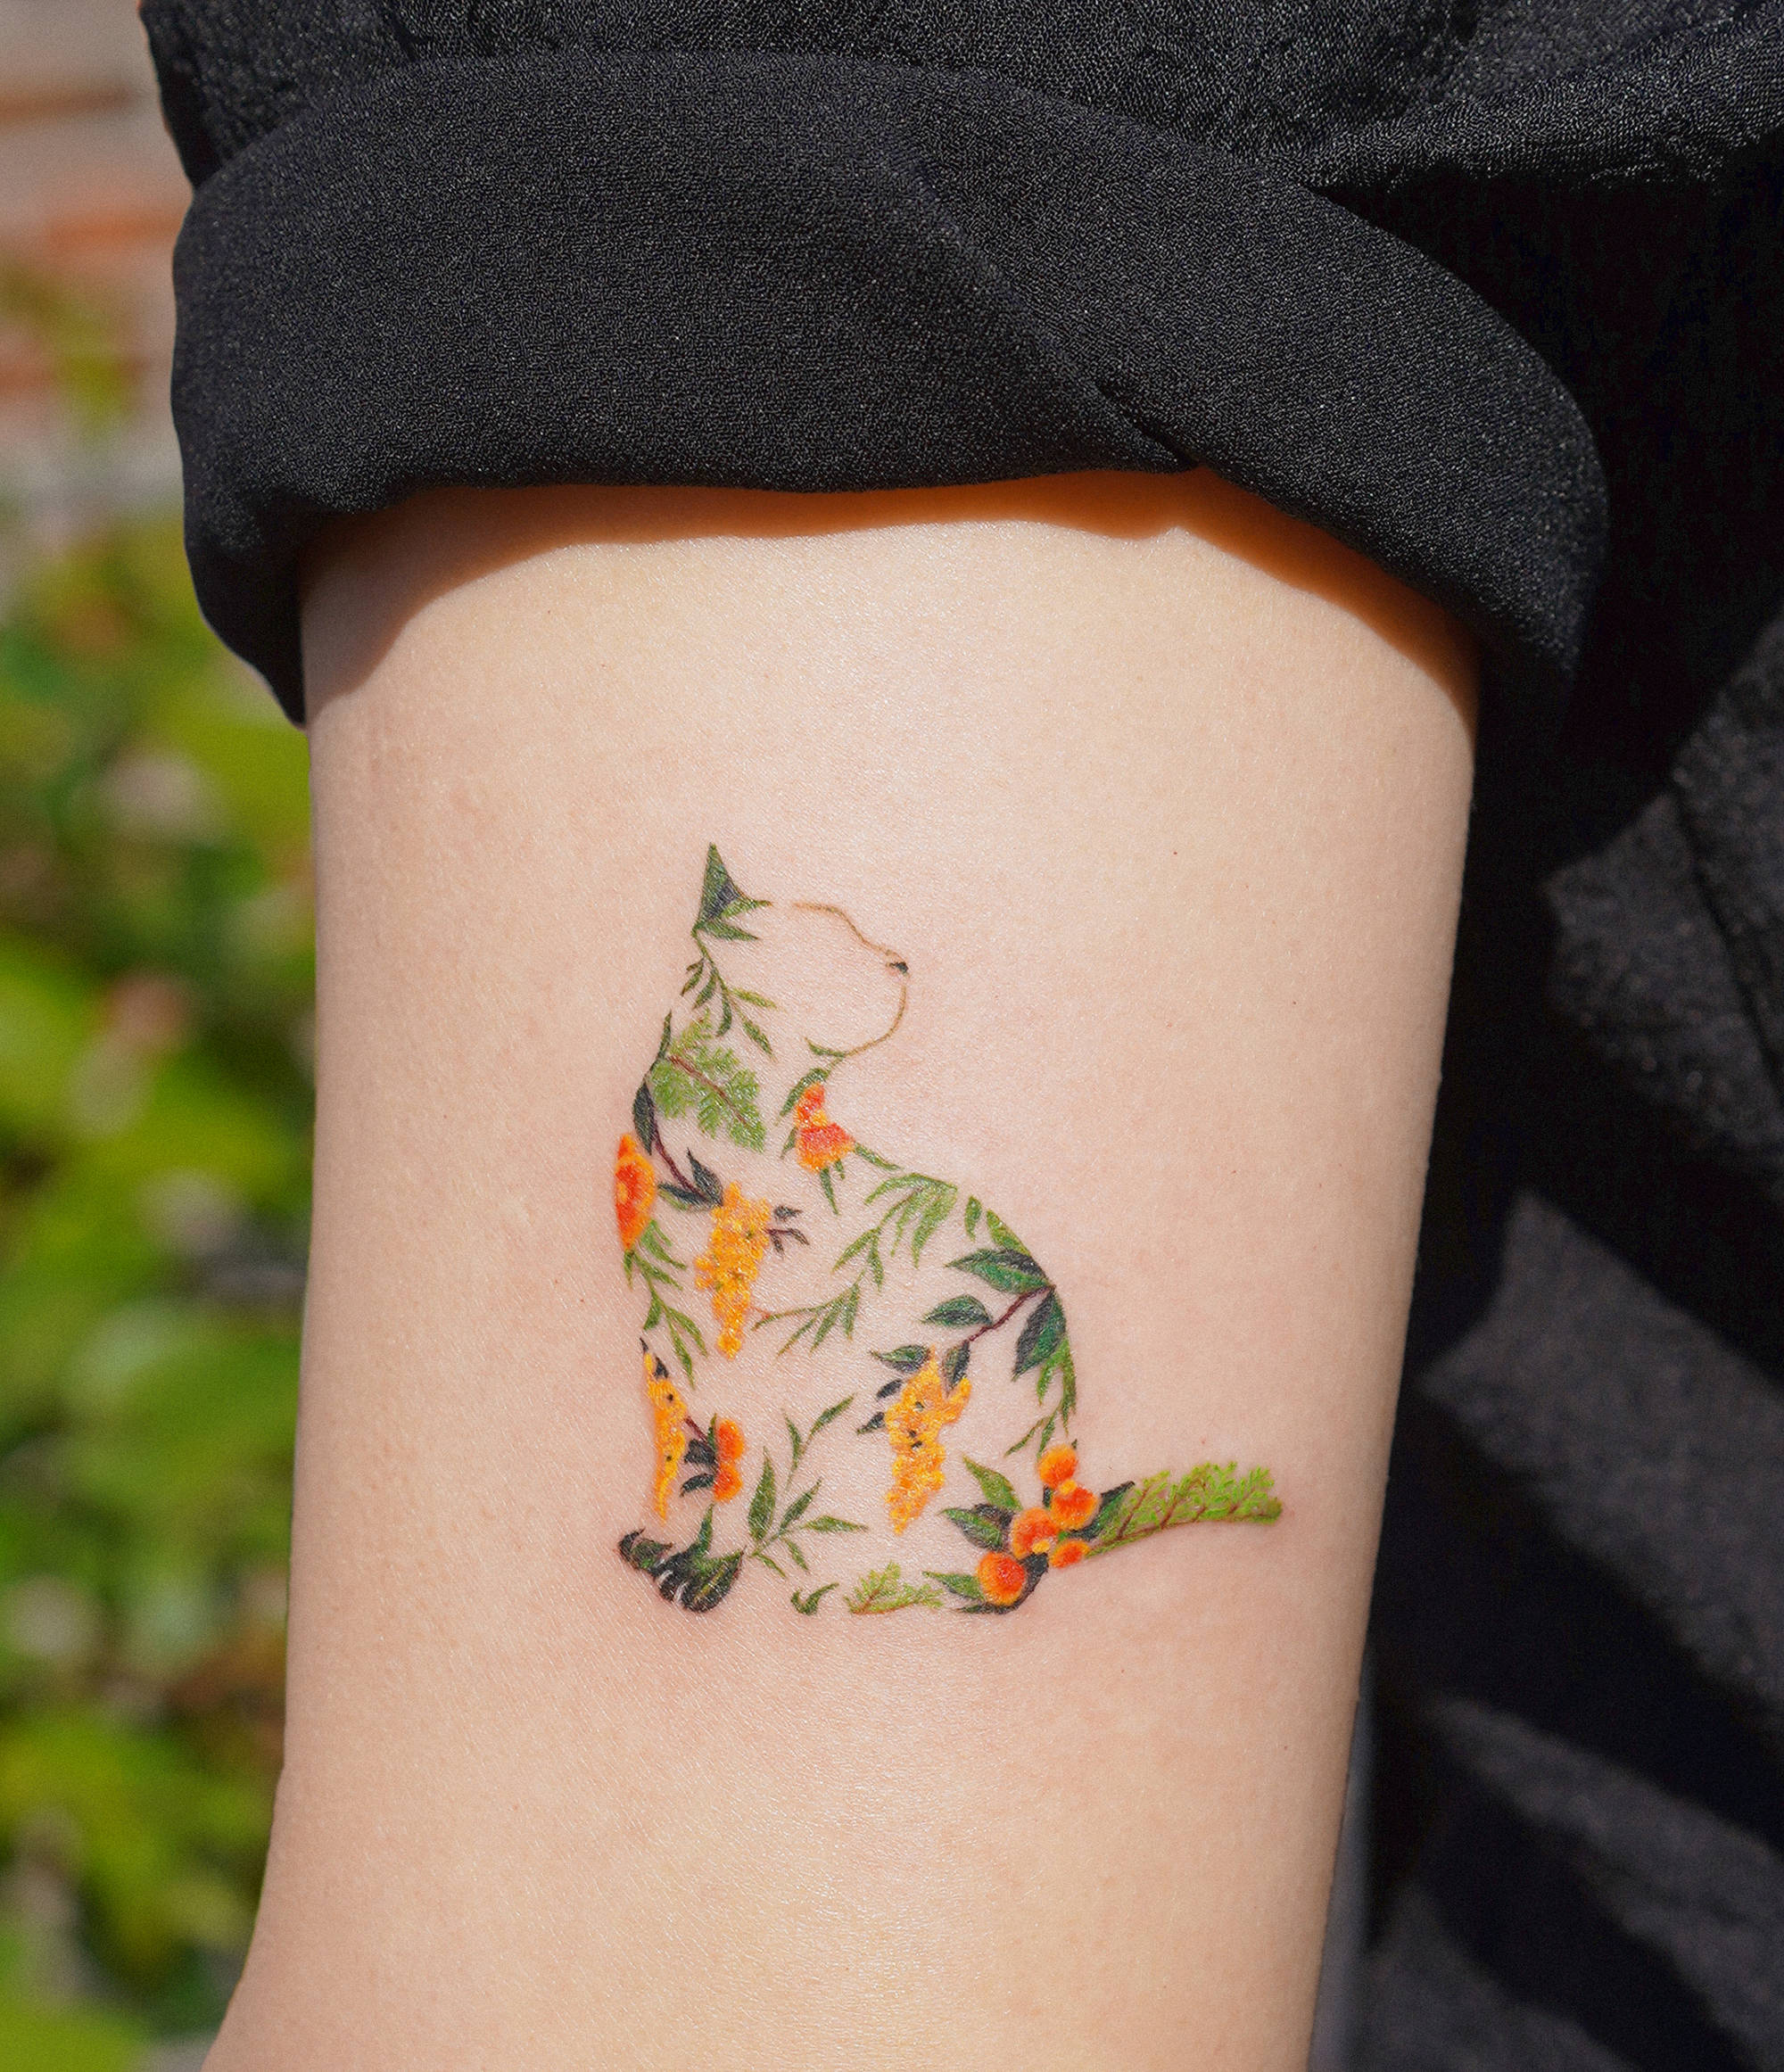 Cat made of flowers tattoo